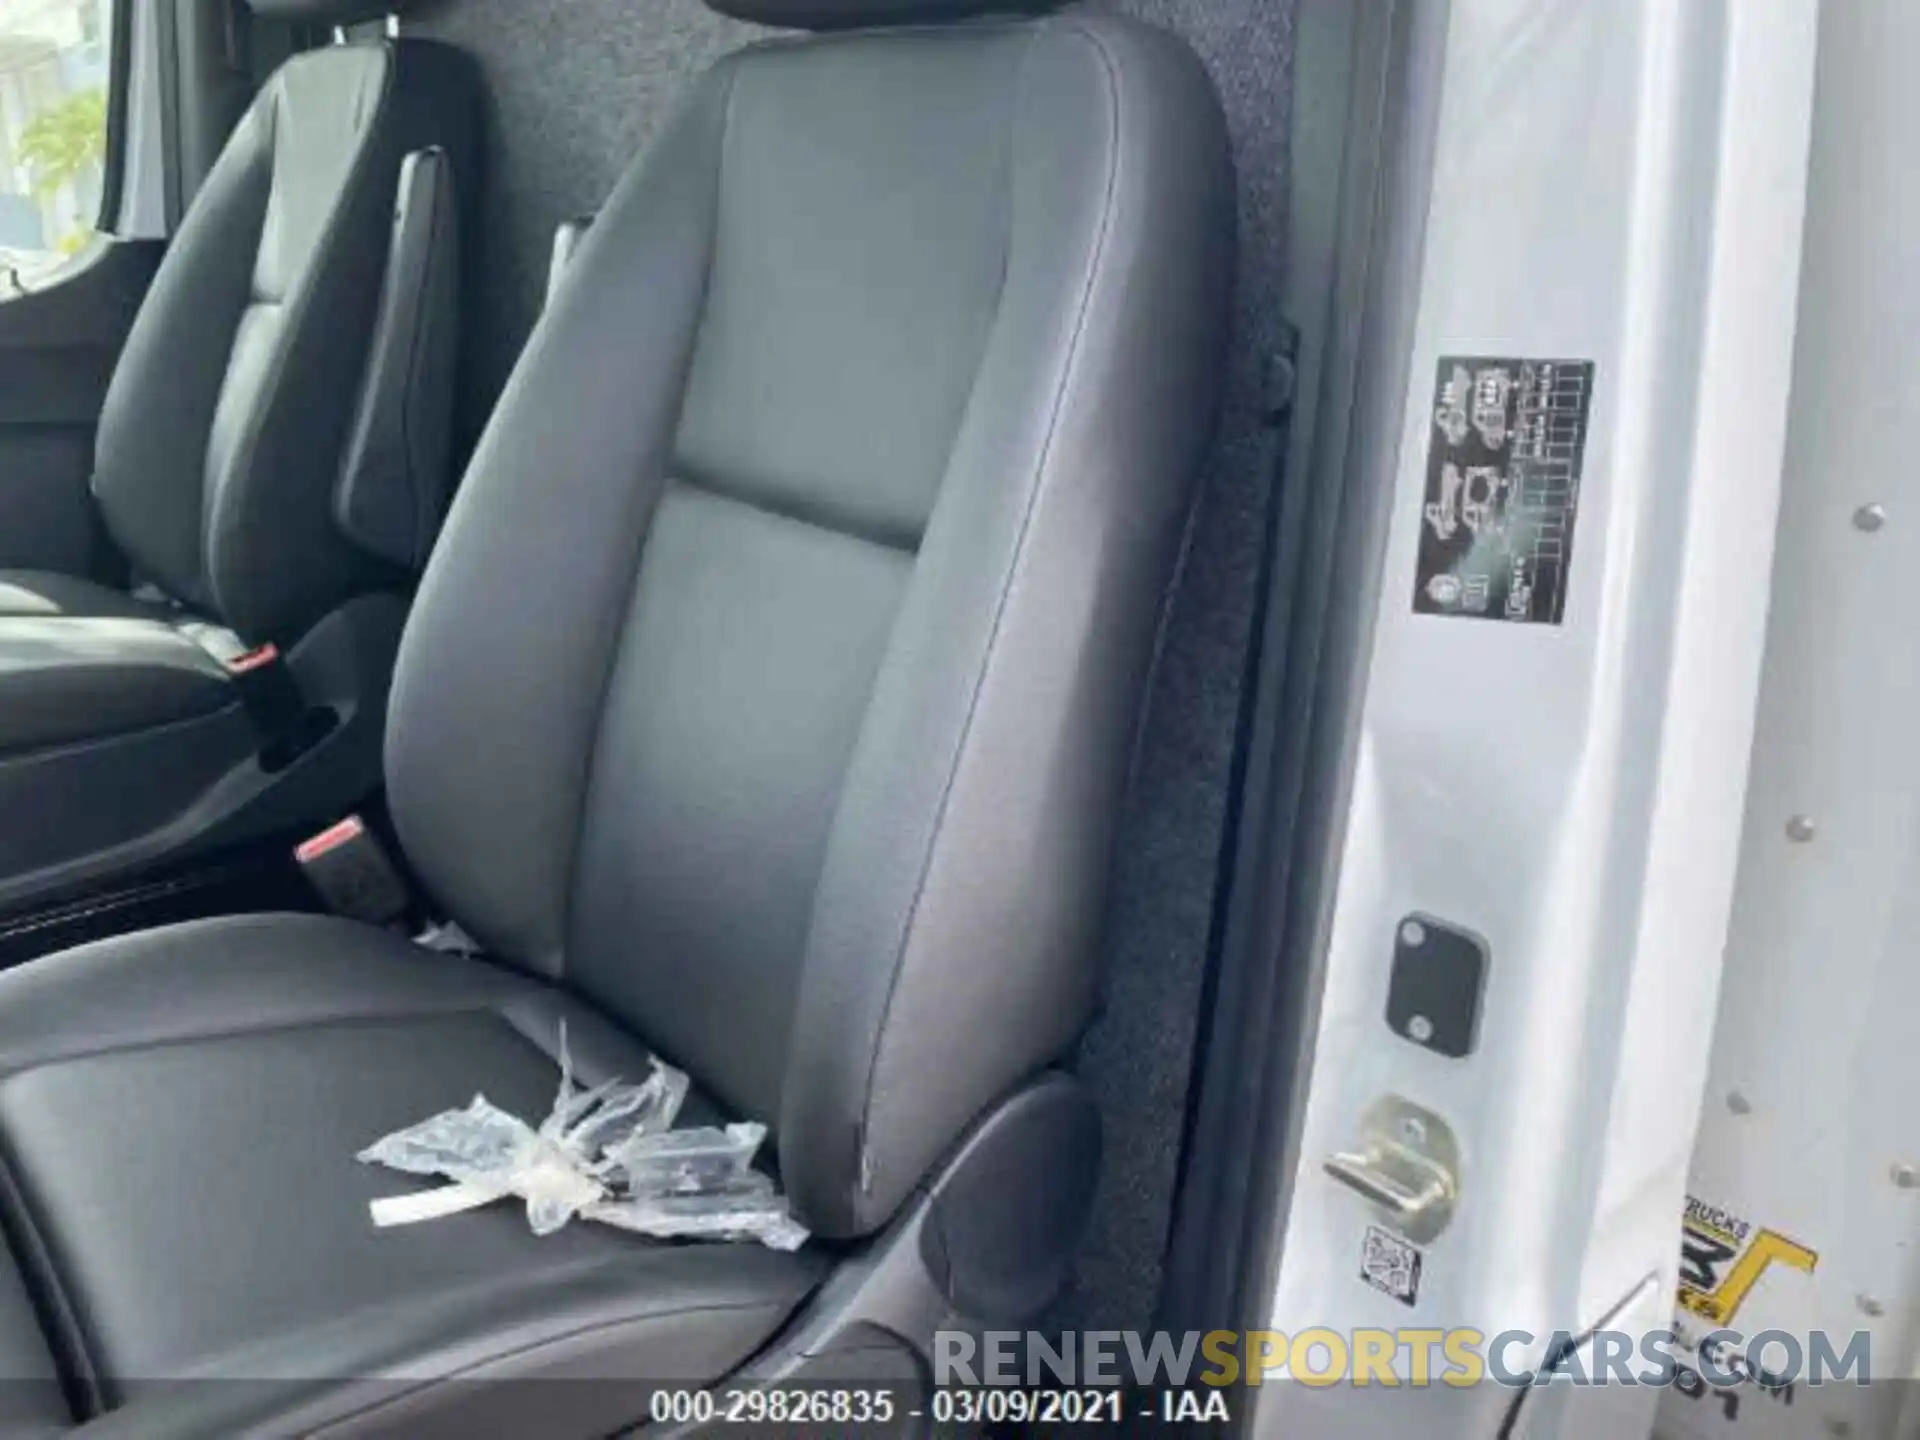 8 Photograph of a damaged car WDAPF4CD6KN015095 MERCEDES-BENZ SPRINTER CAB CHASSIS 2019